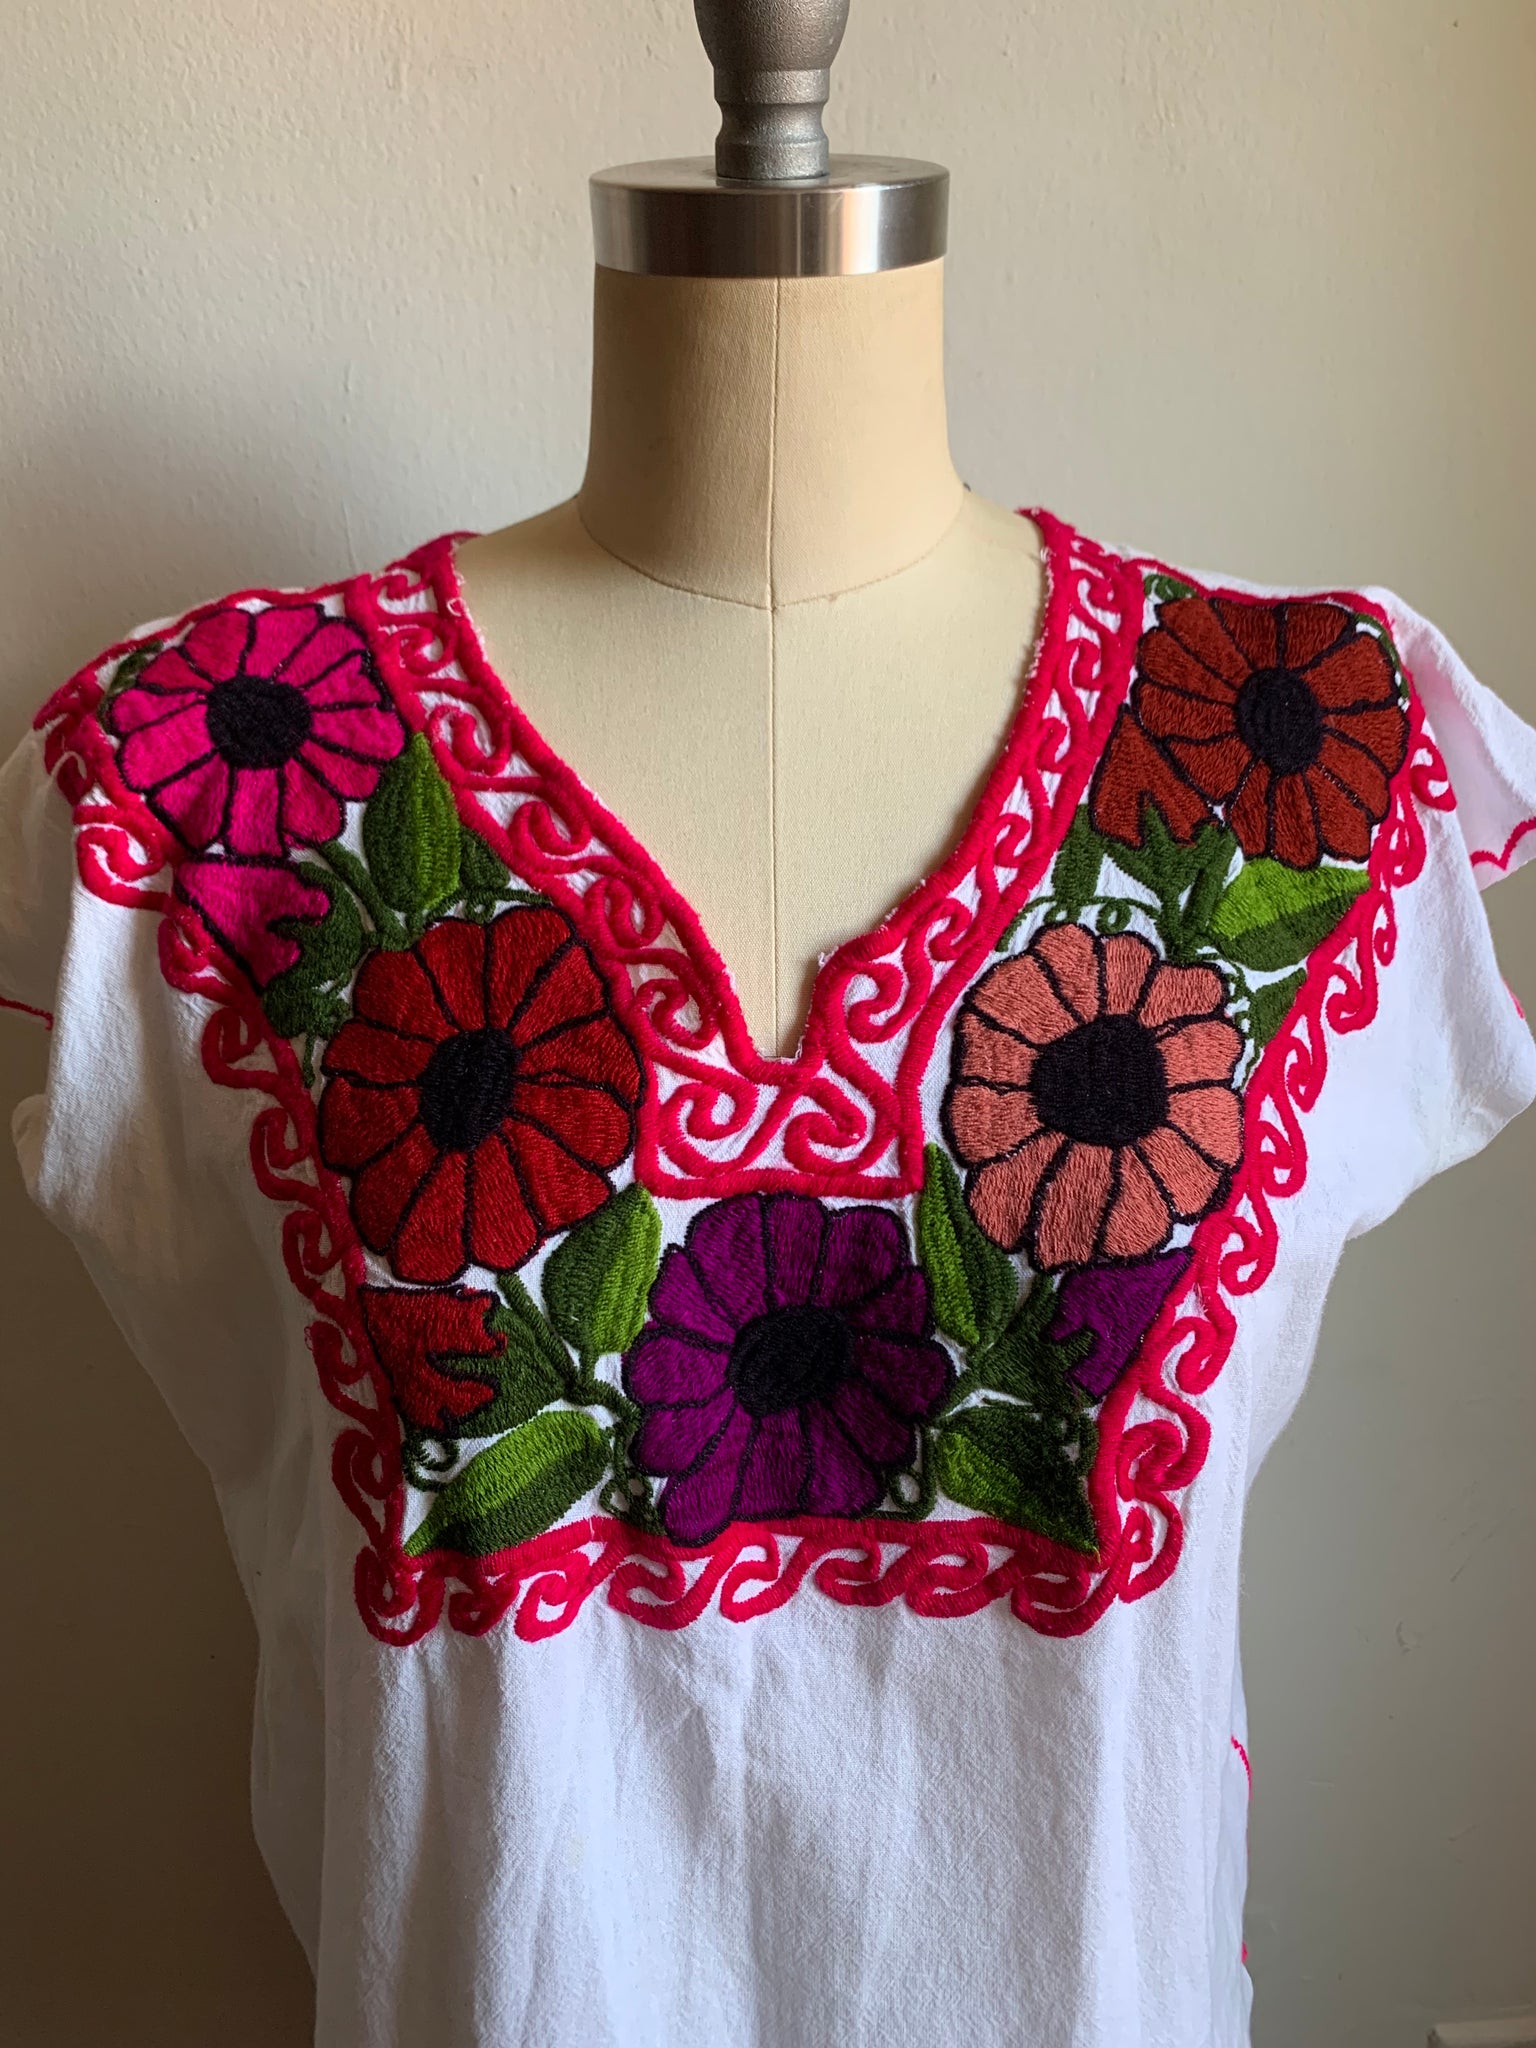 Vintage Bohemian Floral Embroidered Top